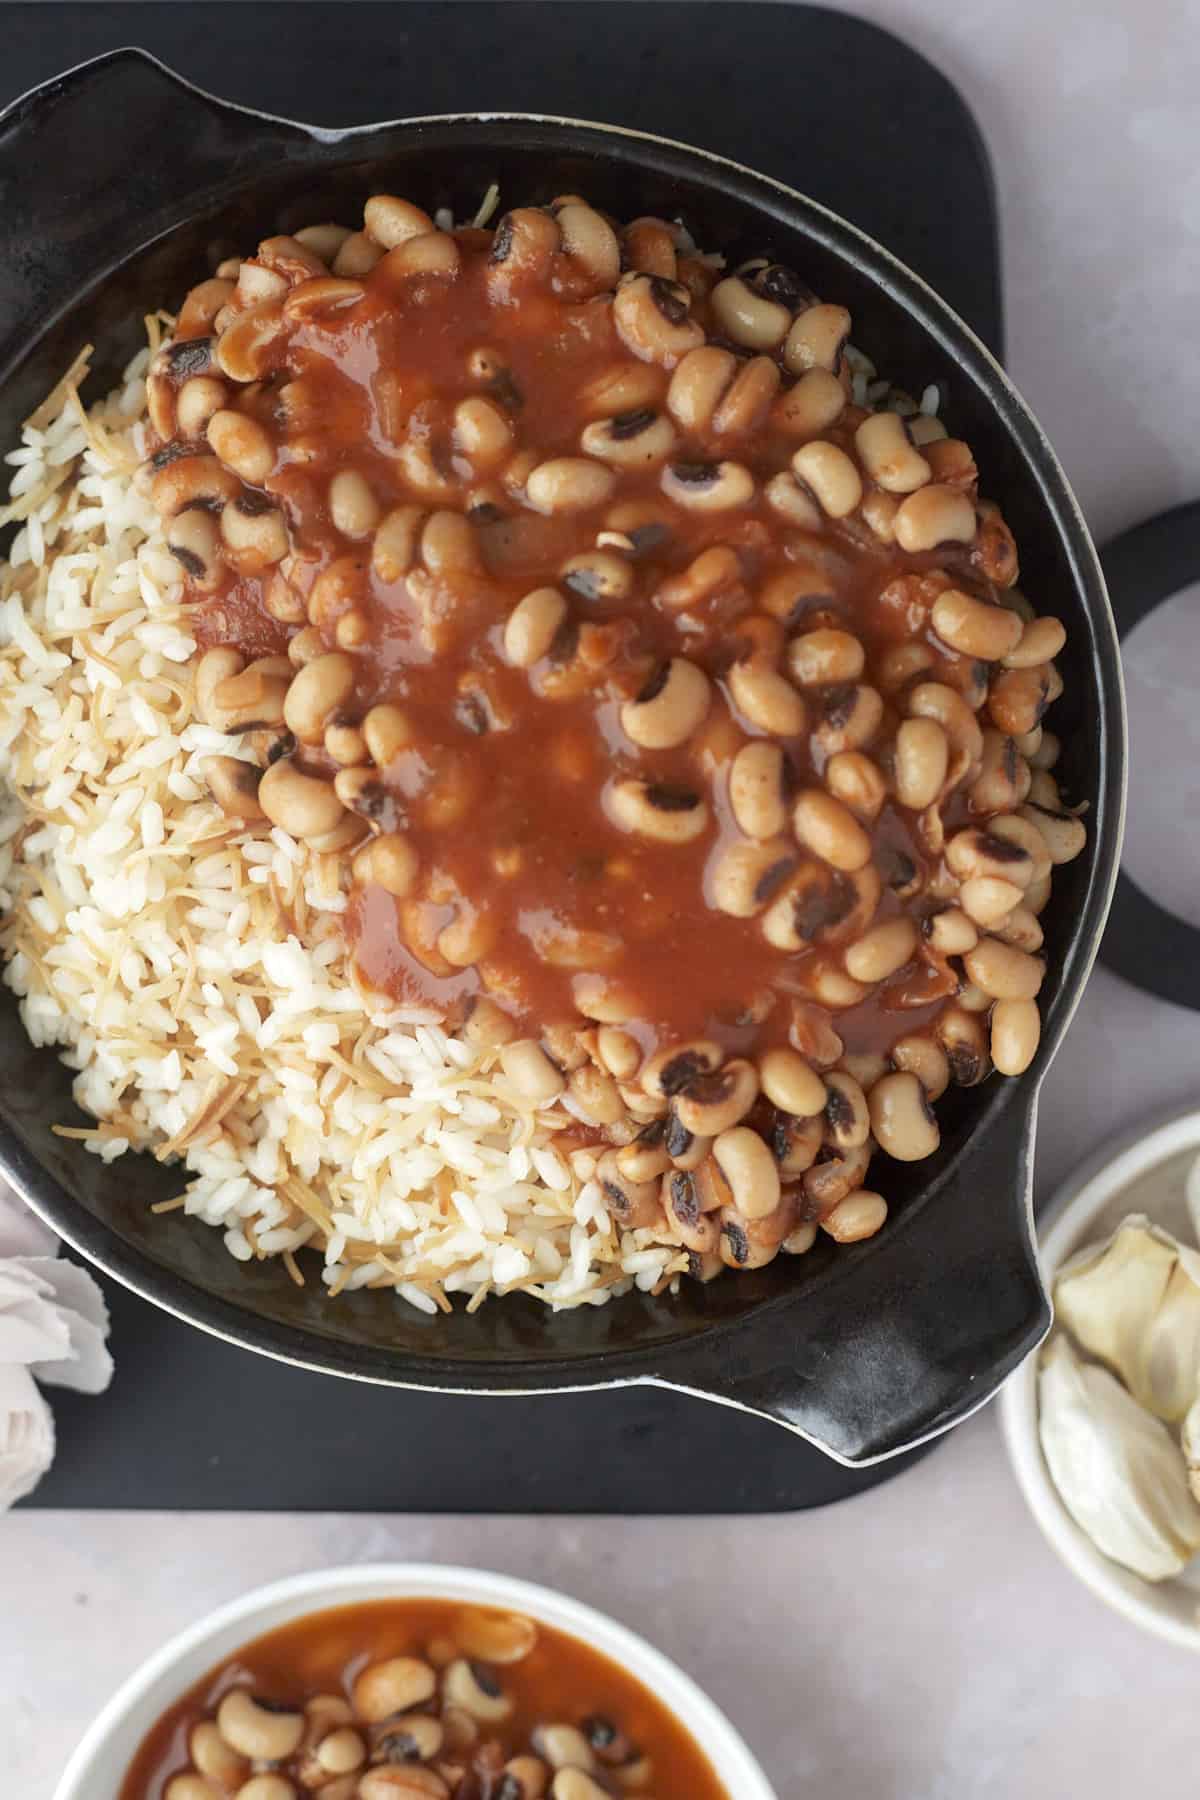 black-eyed pea stew over vermicelli rice